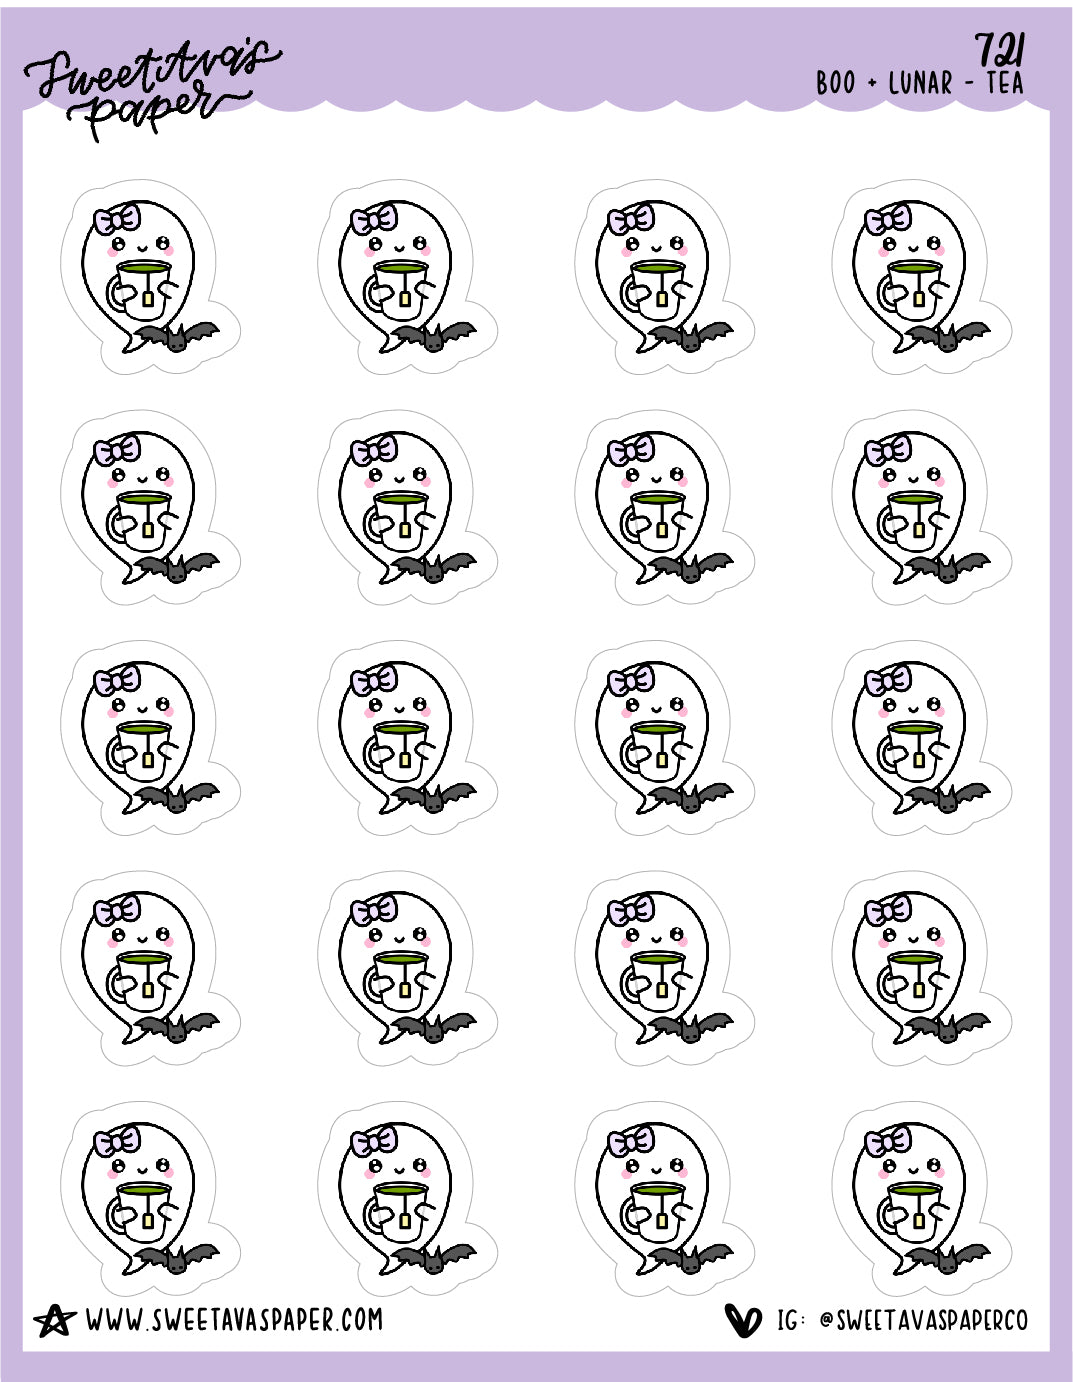 Tea Planner Stickers - Boo and Lunar [721]